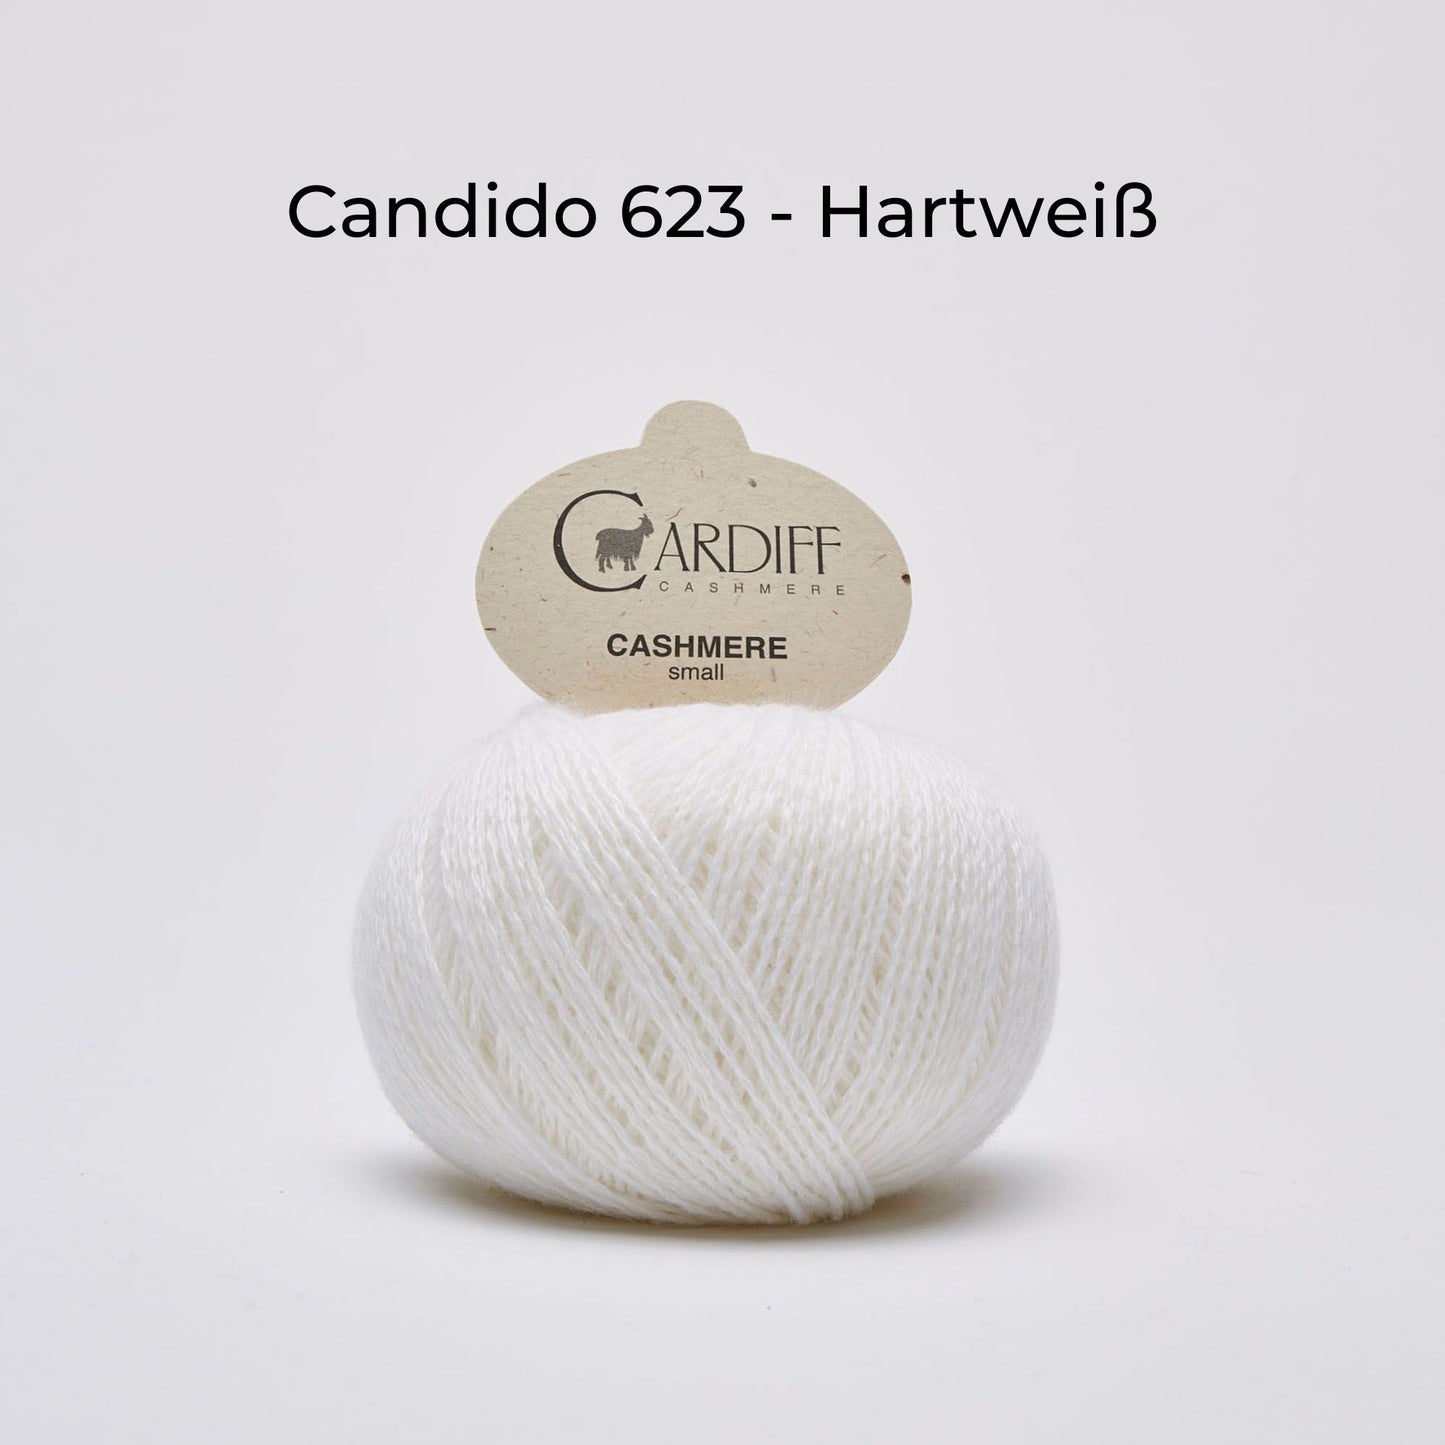 Cashmere wool - Cardiff Cashmere Small 4/28 - NS 2.5-3.5 mm